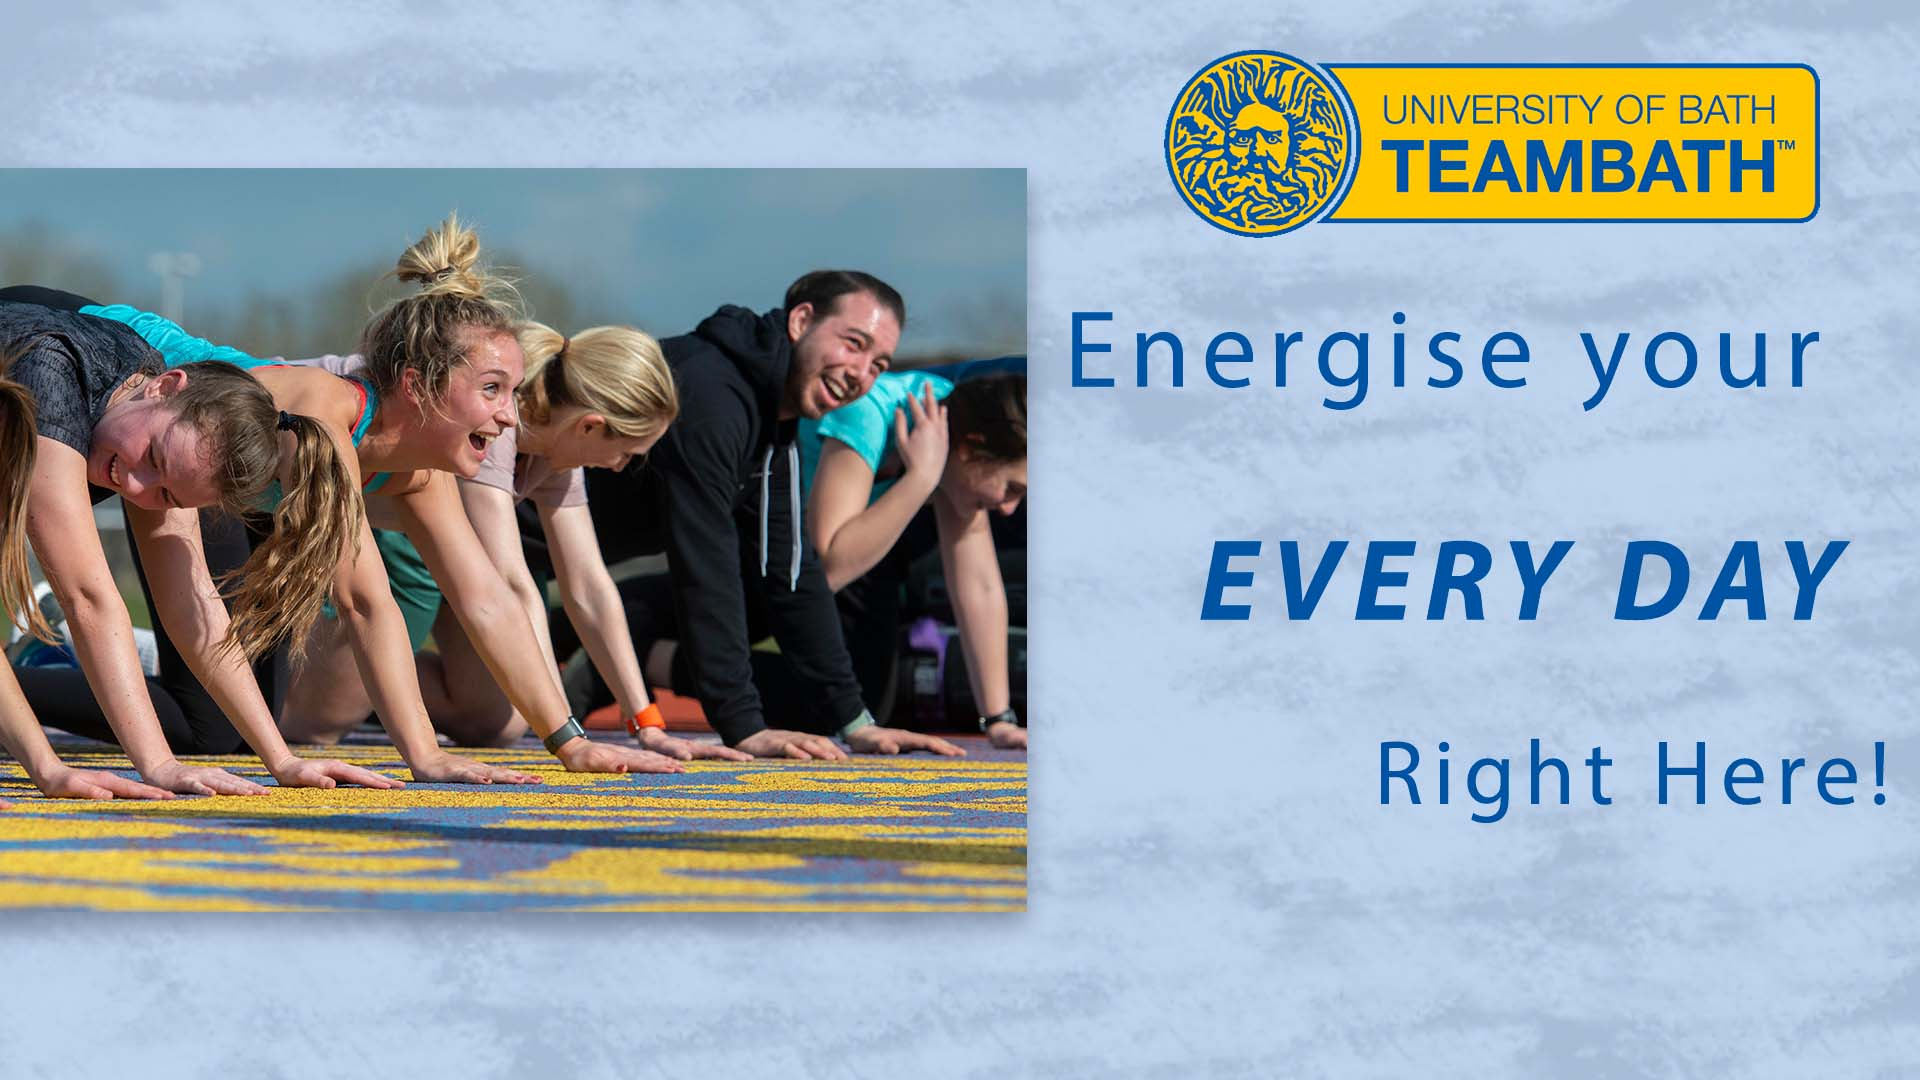 Team Bath logo, people working out and the text: Energise your every day at the Sports Training Village